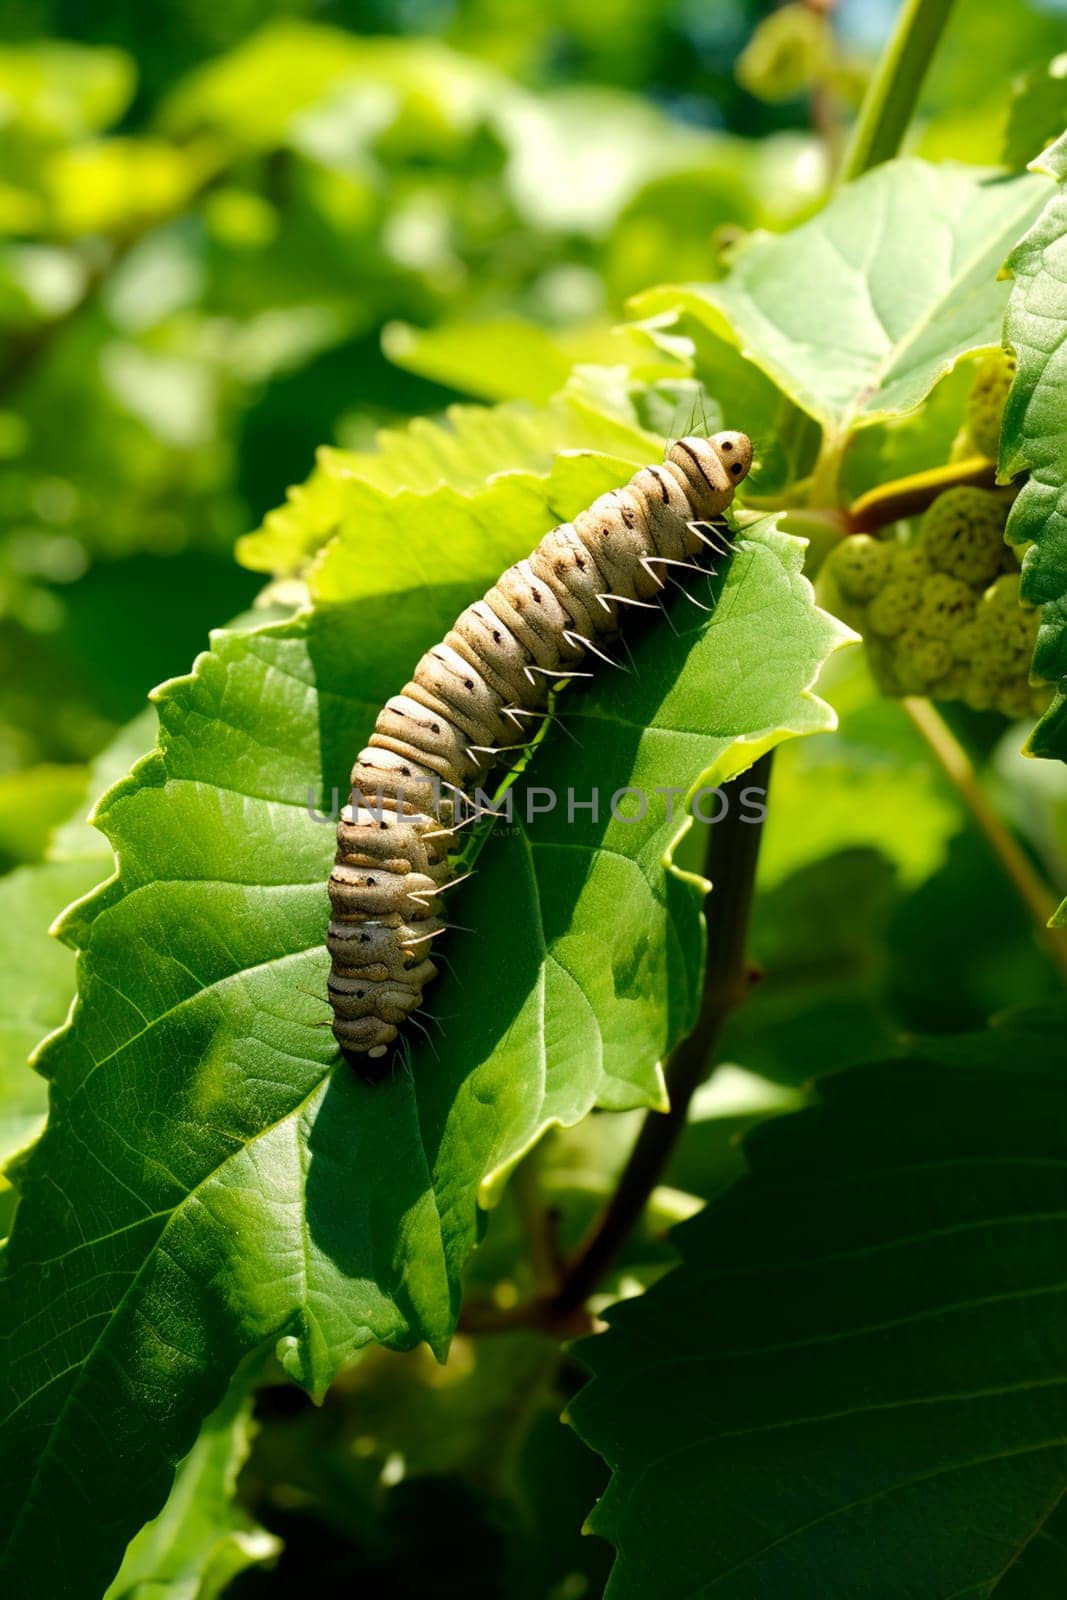 caterpillar on leaves in the garden. Selective focus. nature.